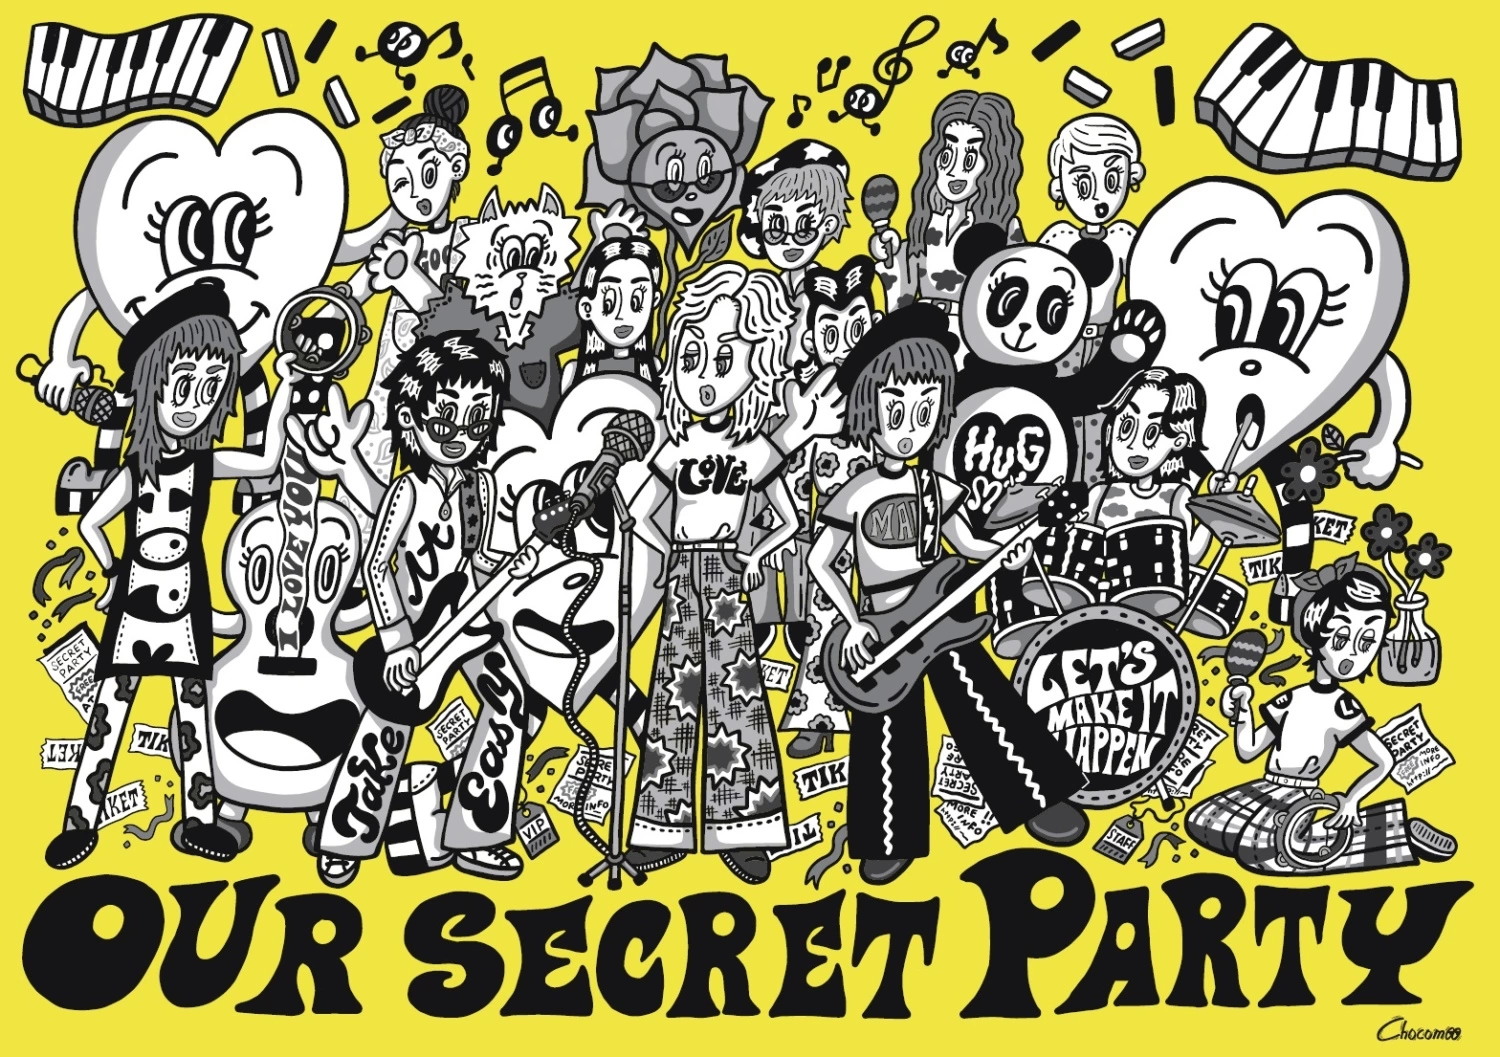 Chocomoo EXHIBITION -OUR SECRET PARTY- Supported by WITH HARAJUKU